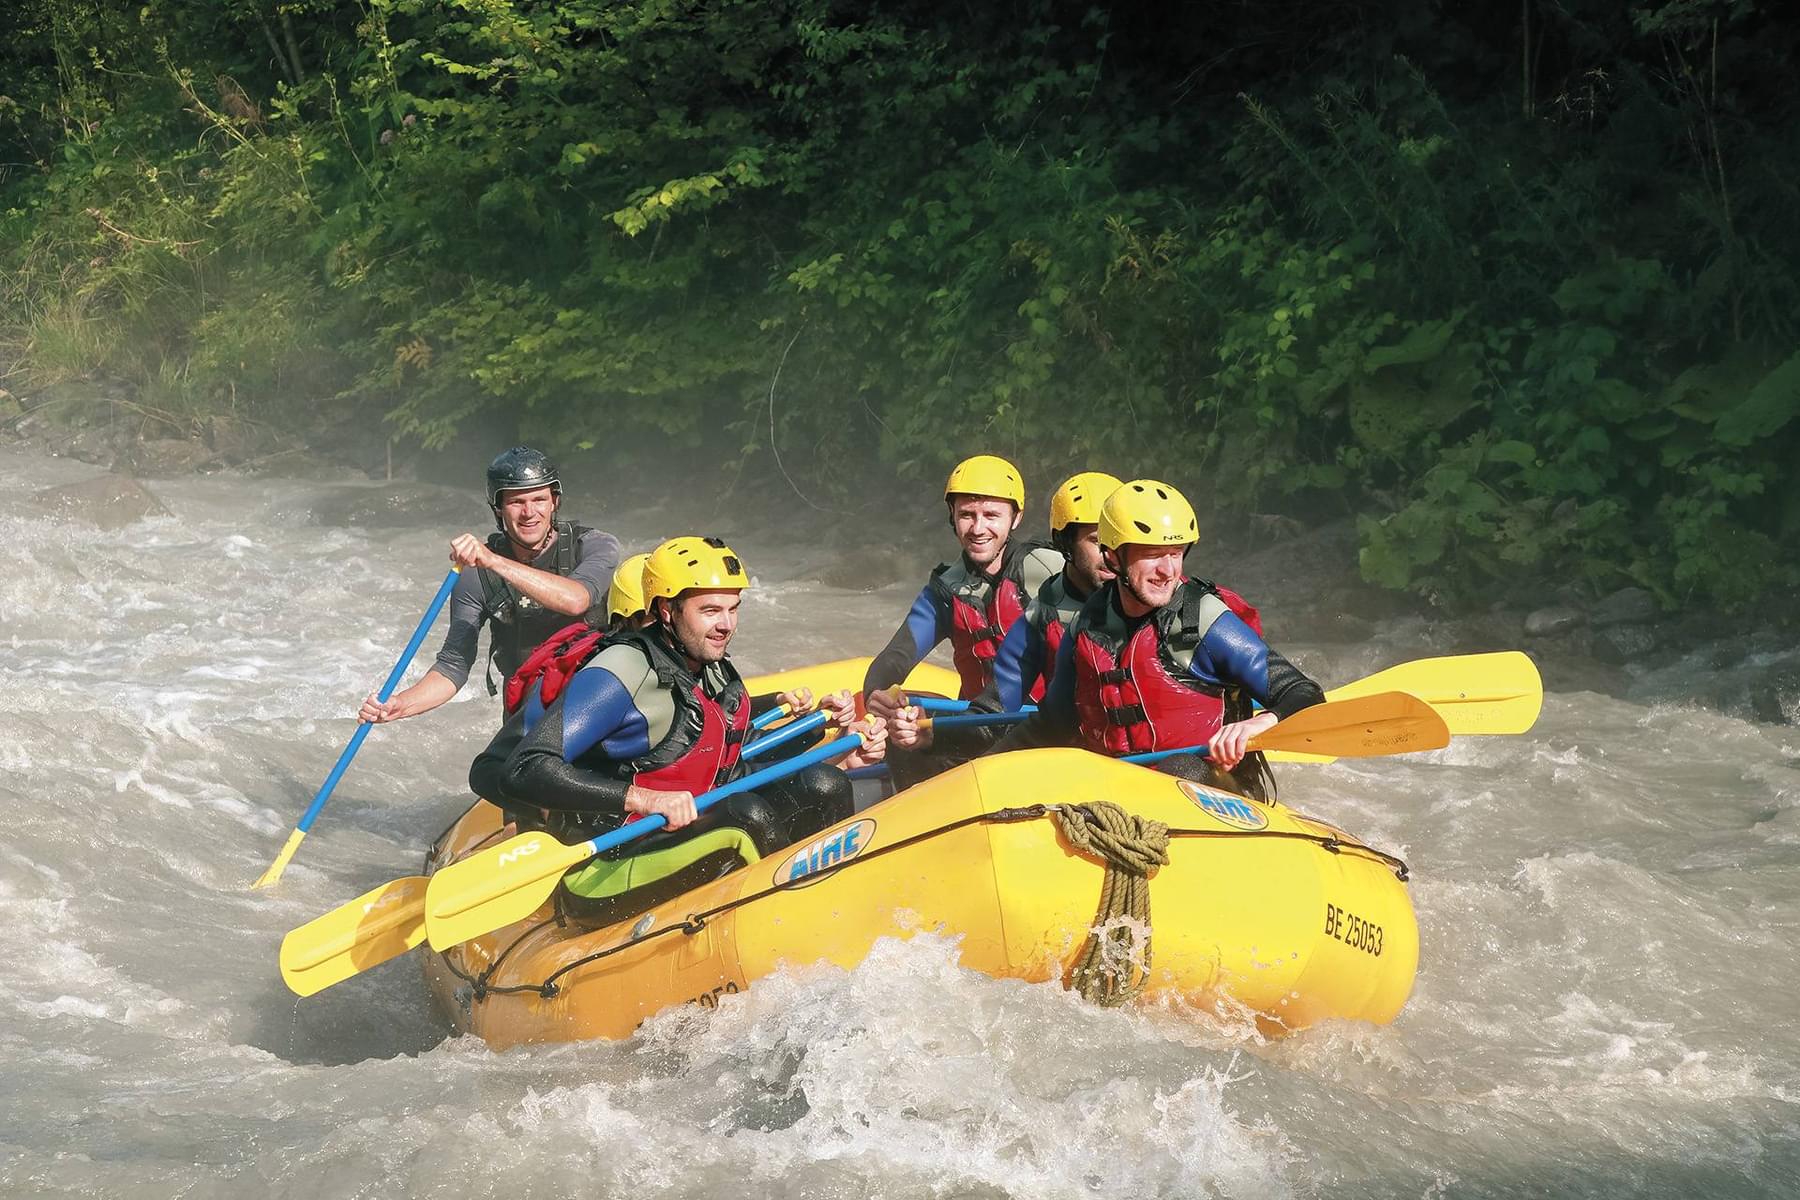 Get onboard for an amazing rafting experience